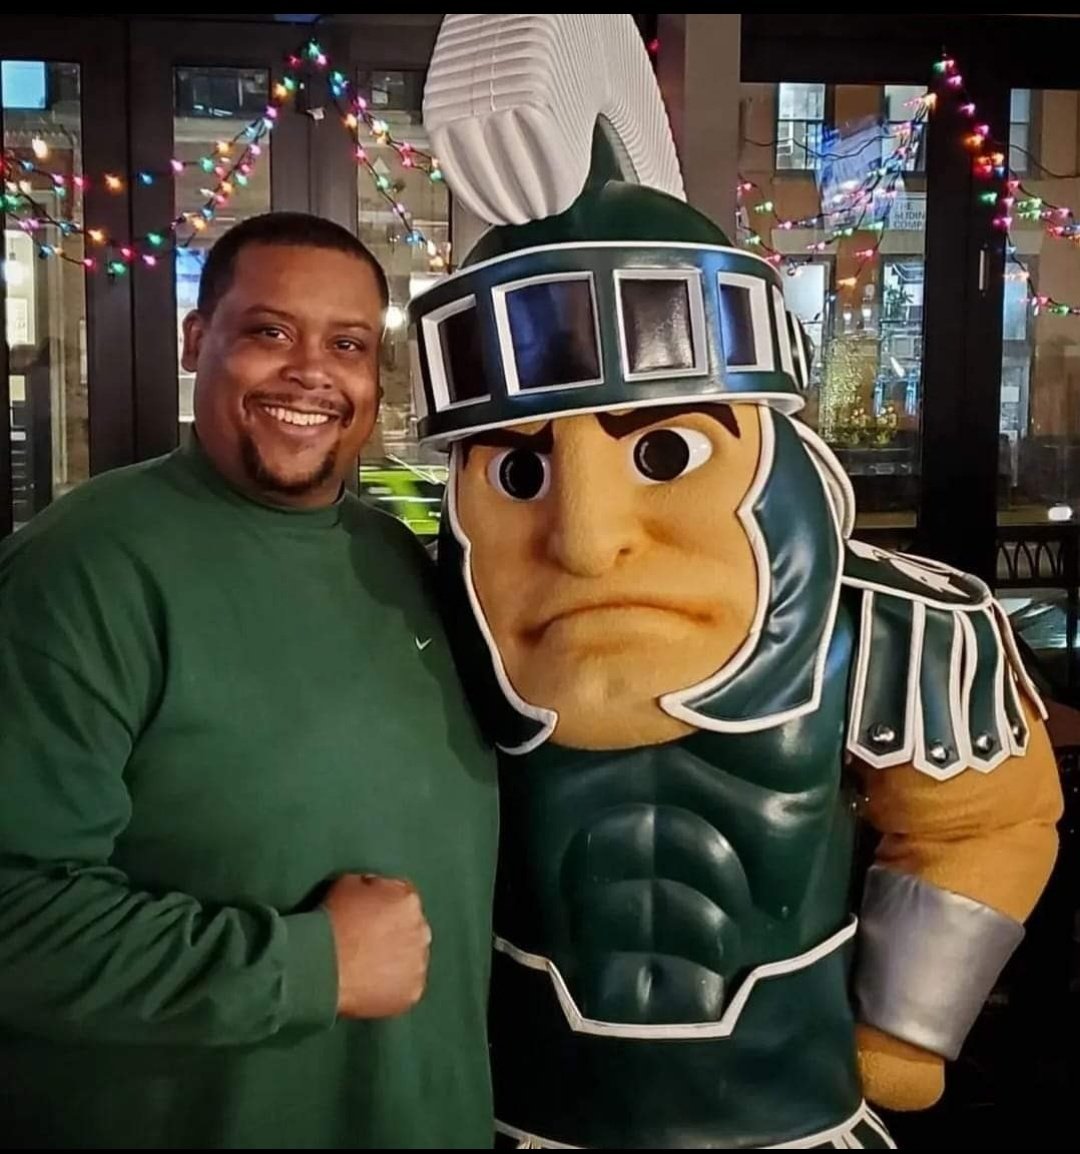 These are a couple of favorite pics of mine for obvious reasons.
@TheRealSparty
@ChooseChicago 
#MichiganState 
#Chicago